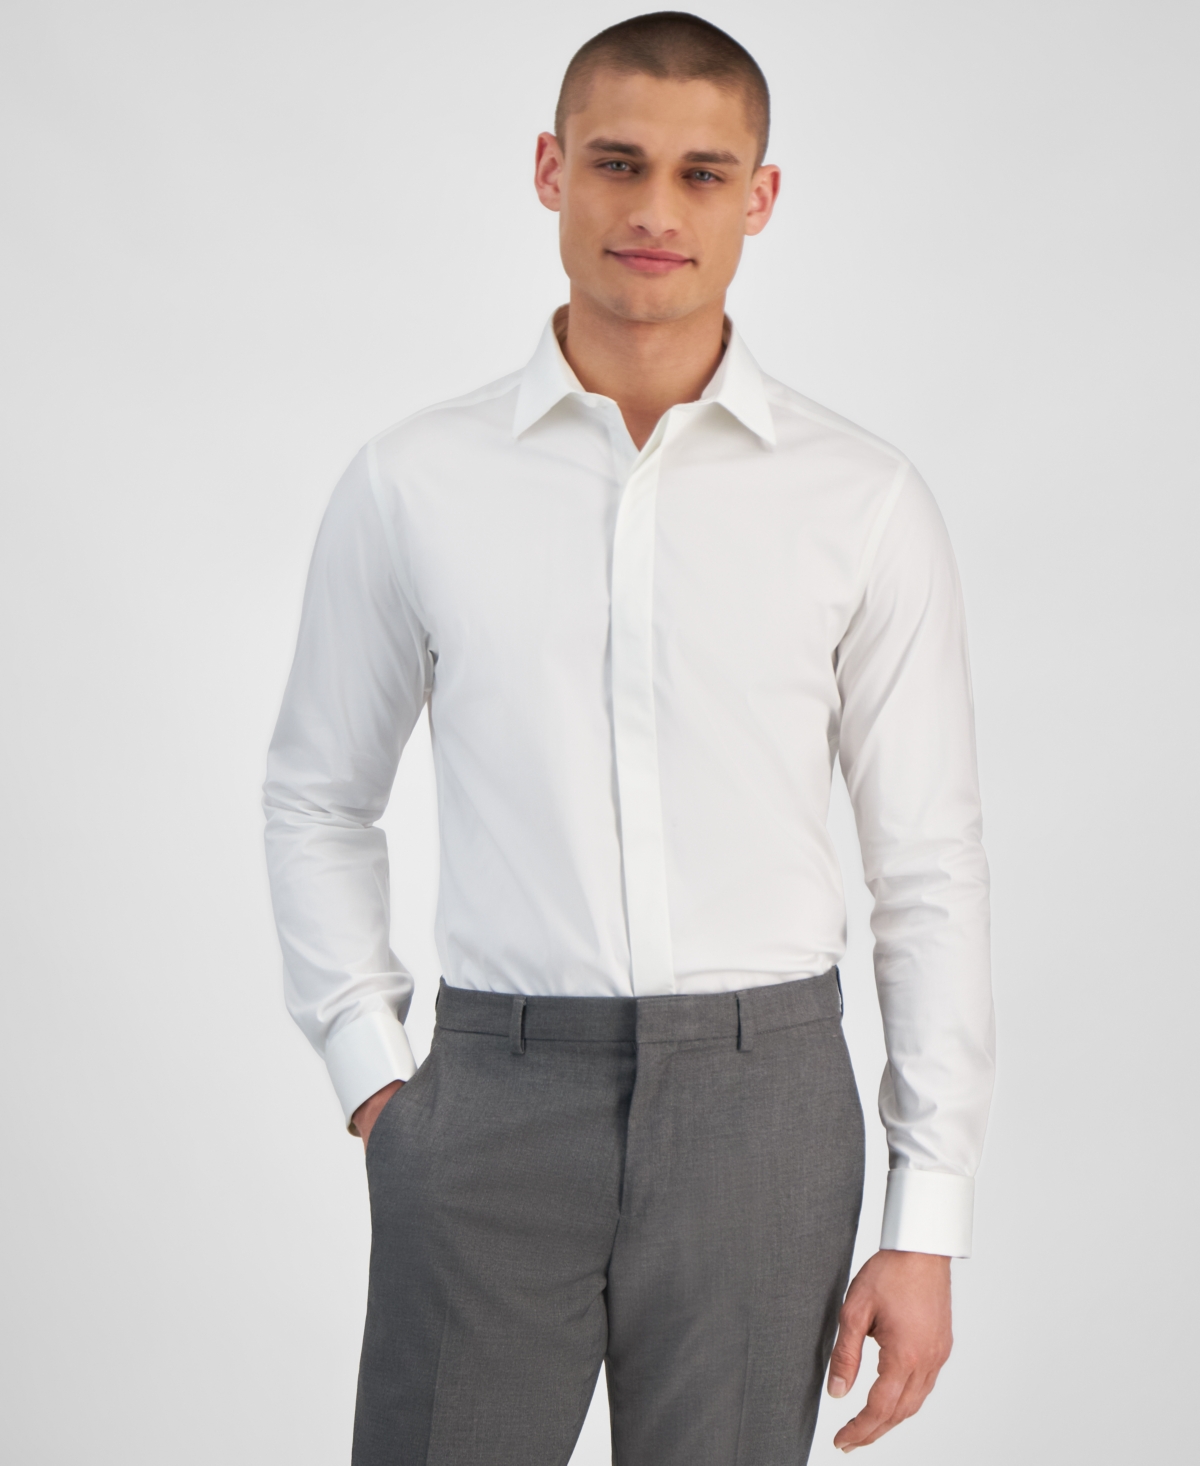 Men's Solid Slim-Fit Dress Shirt, Created for Macy's - Bright White